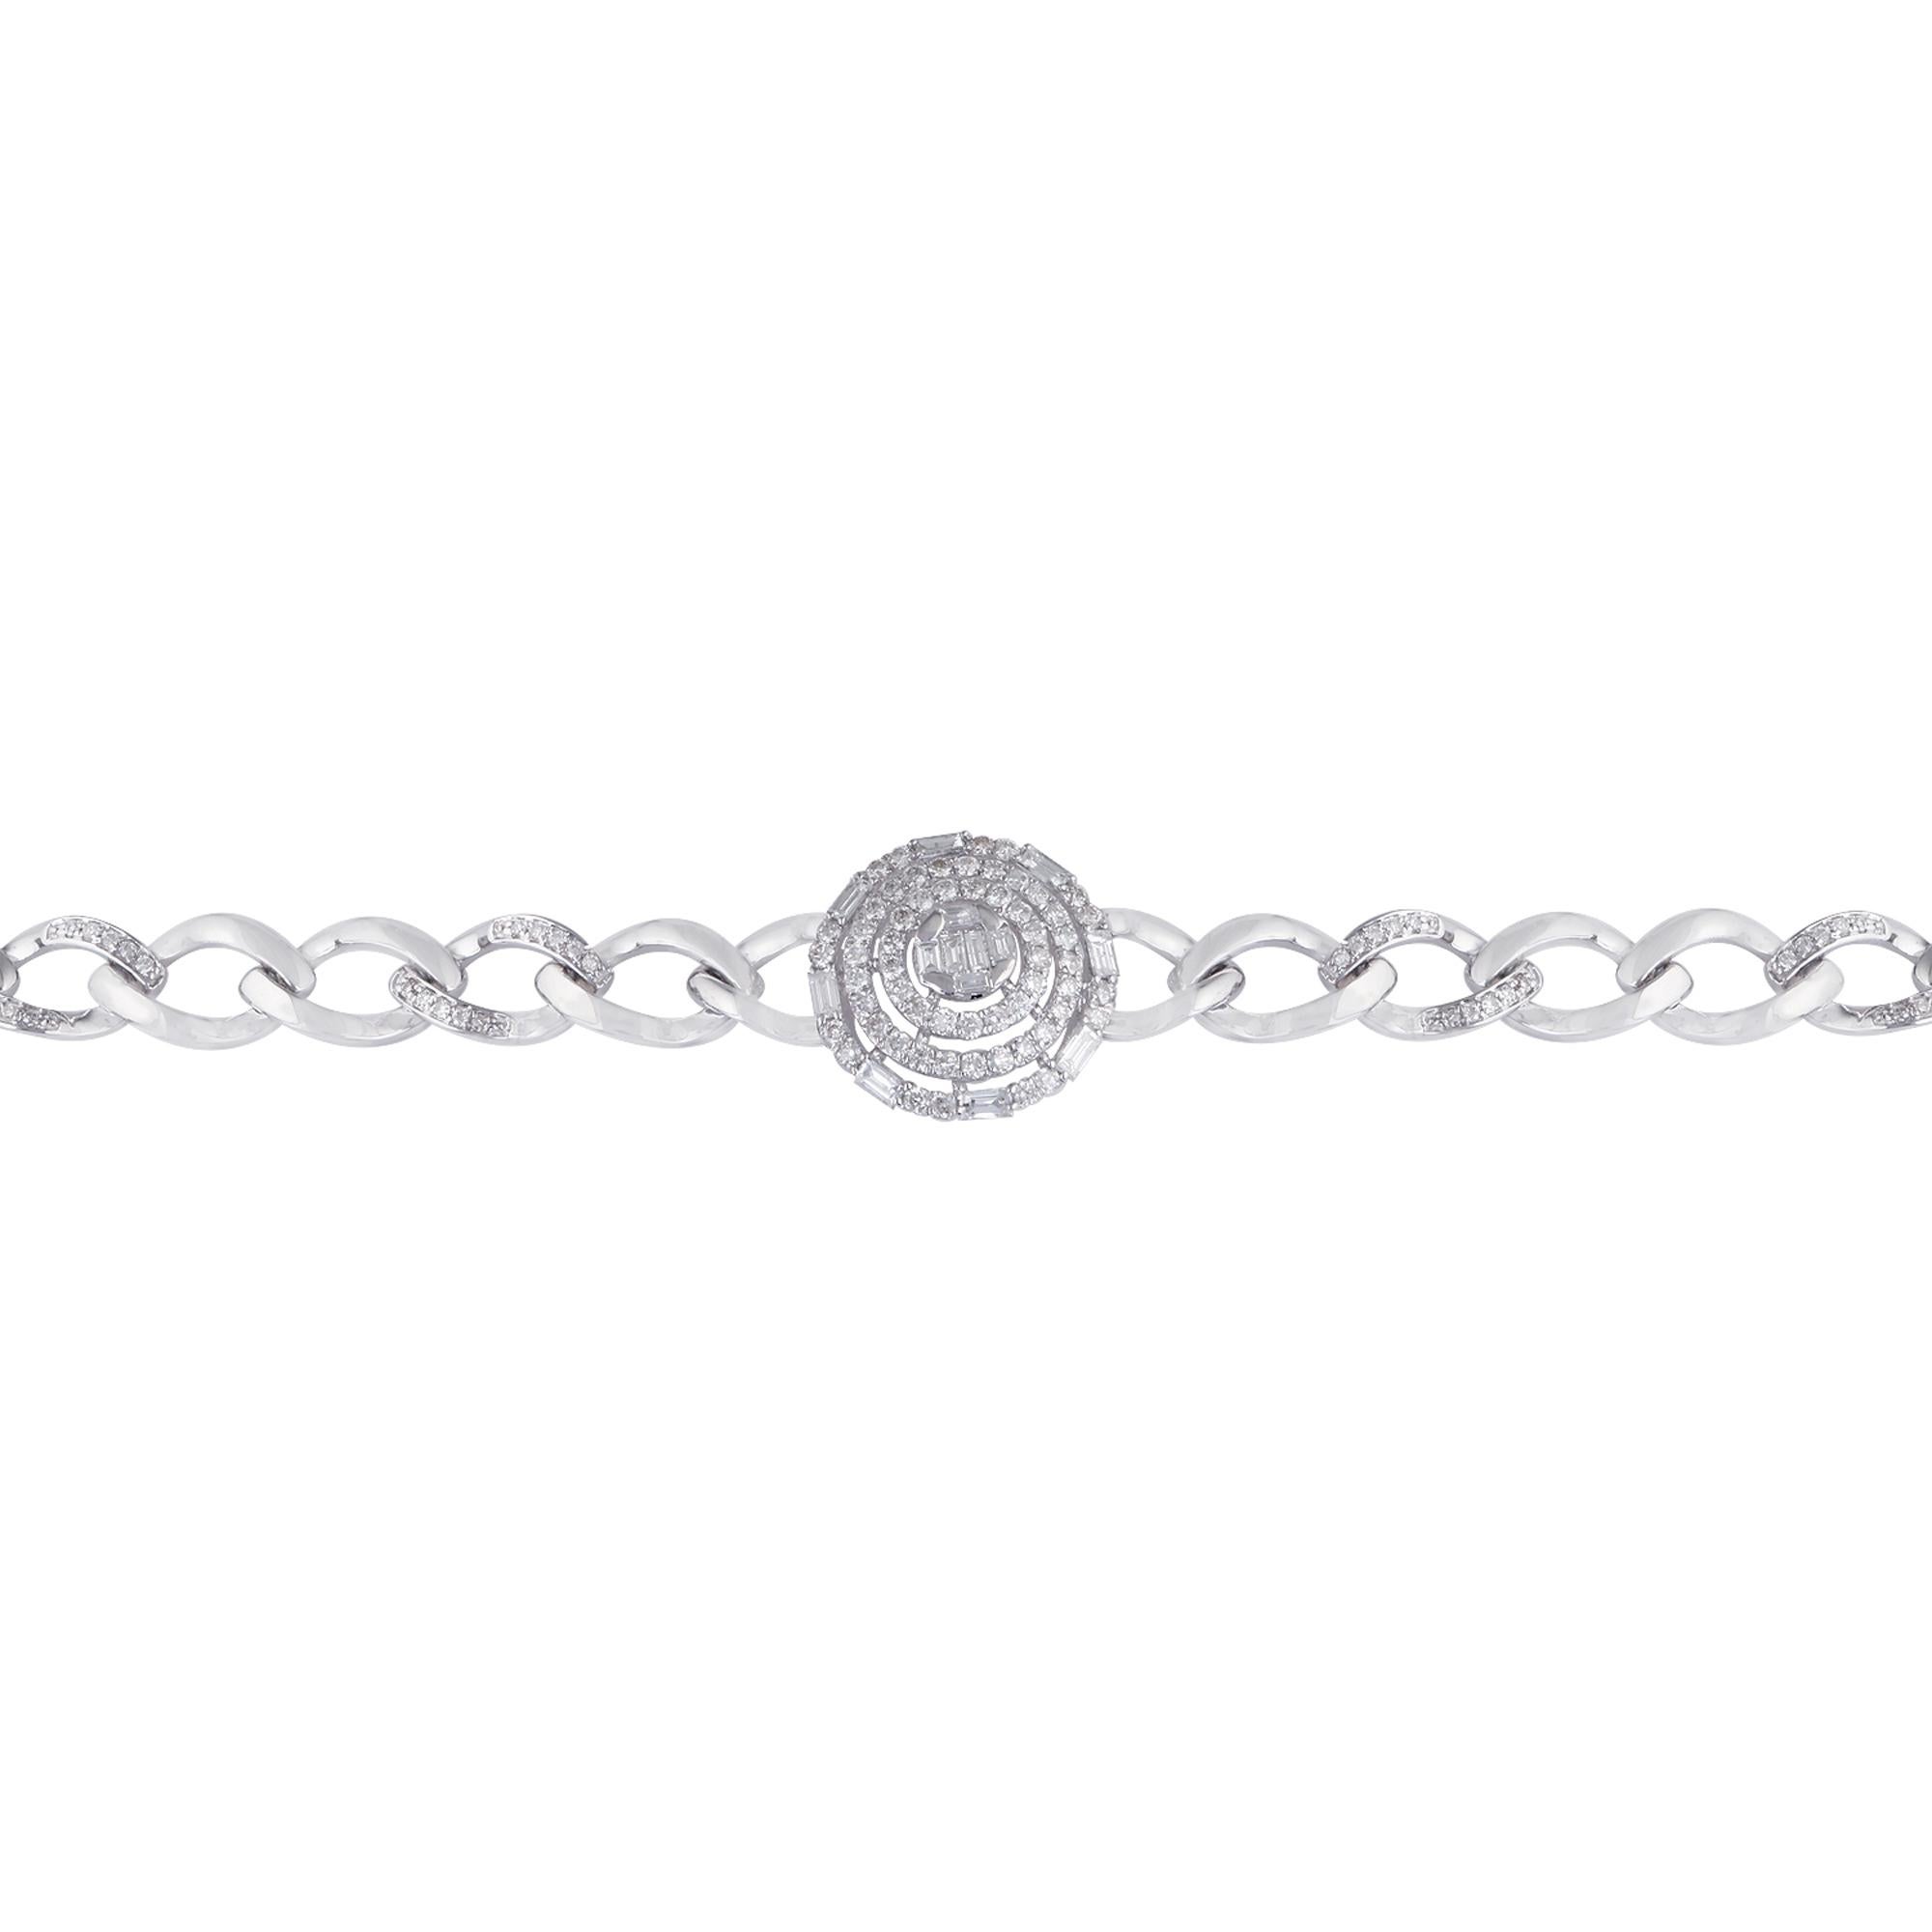 Item Code :- CN-26243
Gross Wt. :- 13.34 gm
18k White Gold Wt. :- 13.12 gm
Diamond Wt. :- 1.10 Ct. ( AVERAGE DIAMOND CLARITY SI1-SI2 & COLOR H-I )
Bracelet Length :- 7 Inch
✦ Sizing
.....................
We can adjust most items to fit your sizing